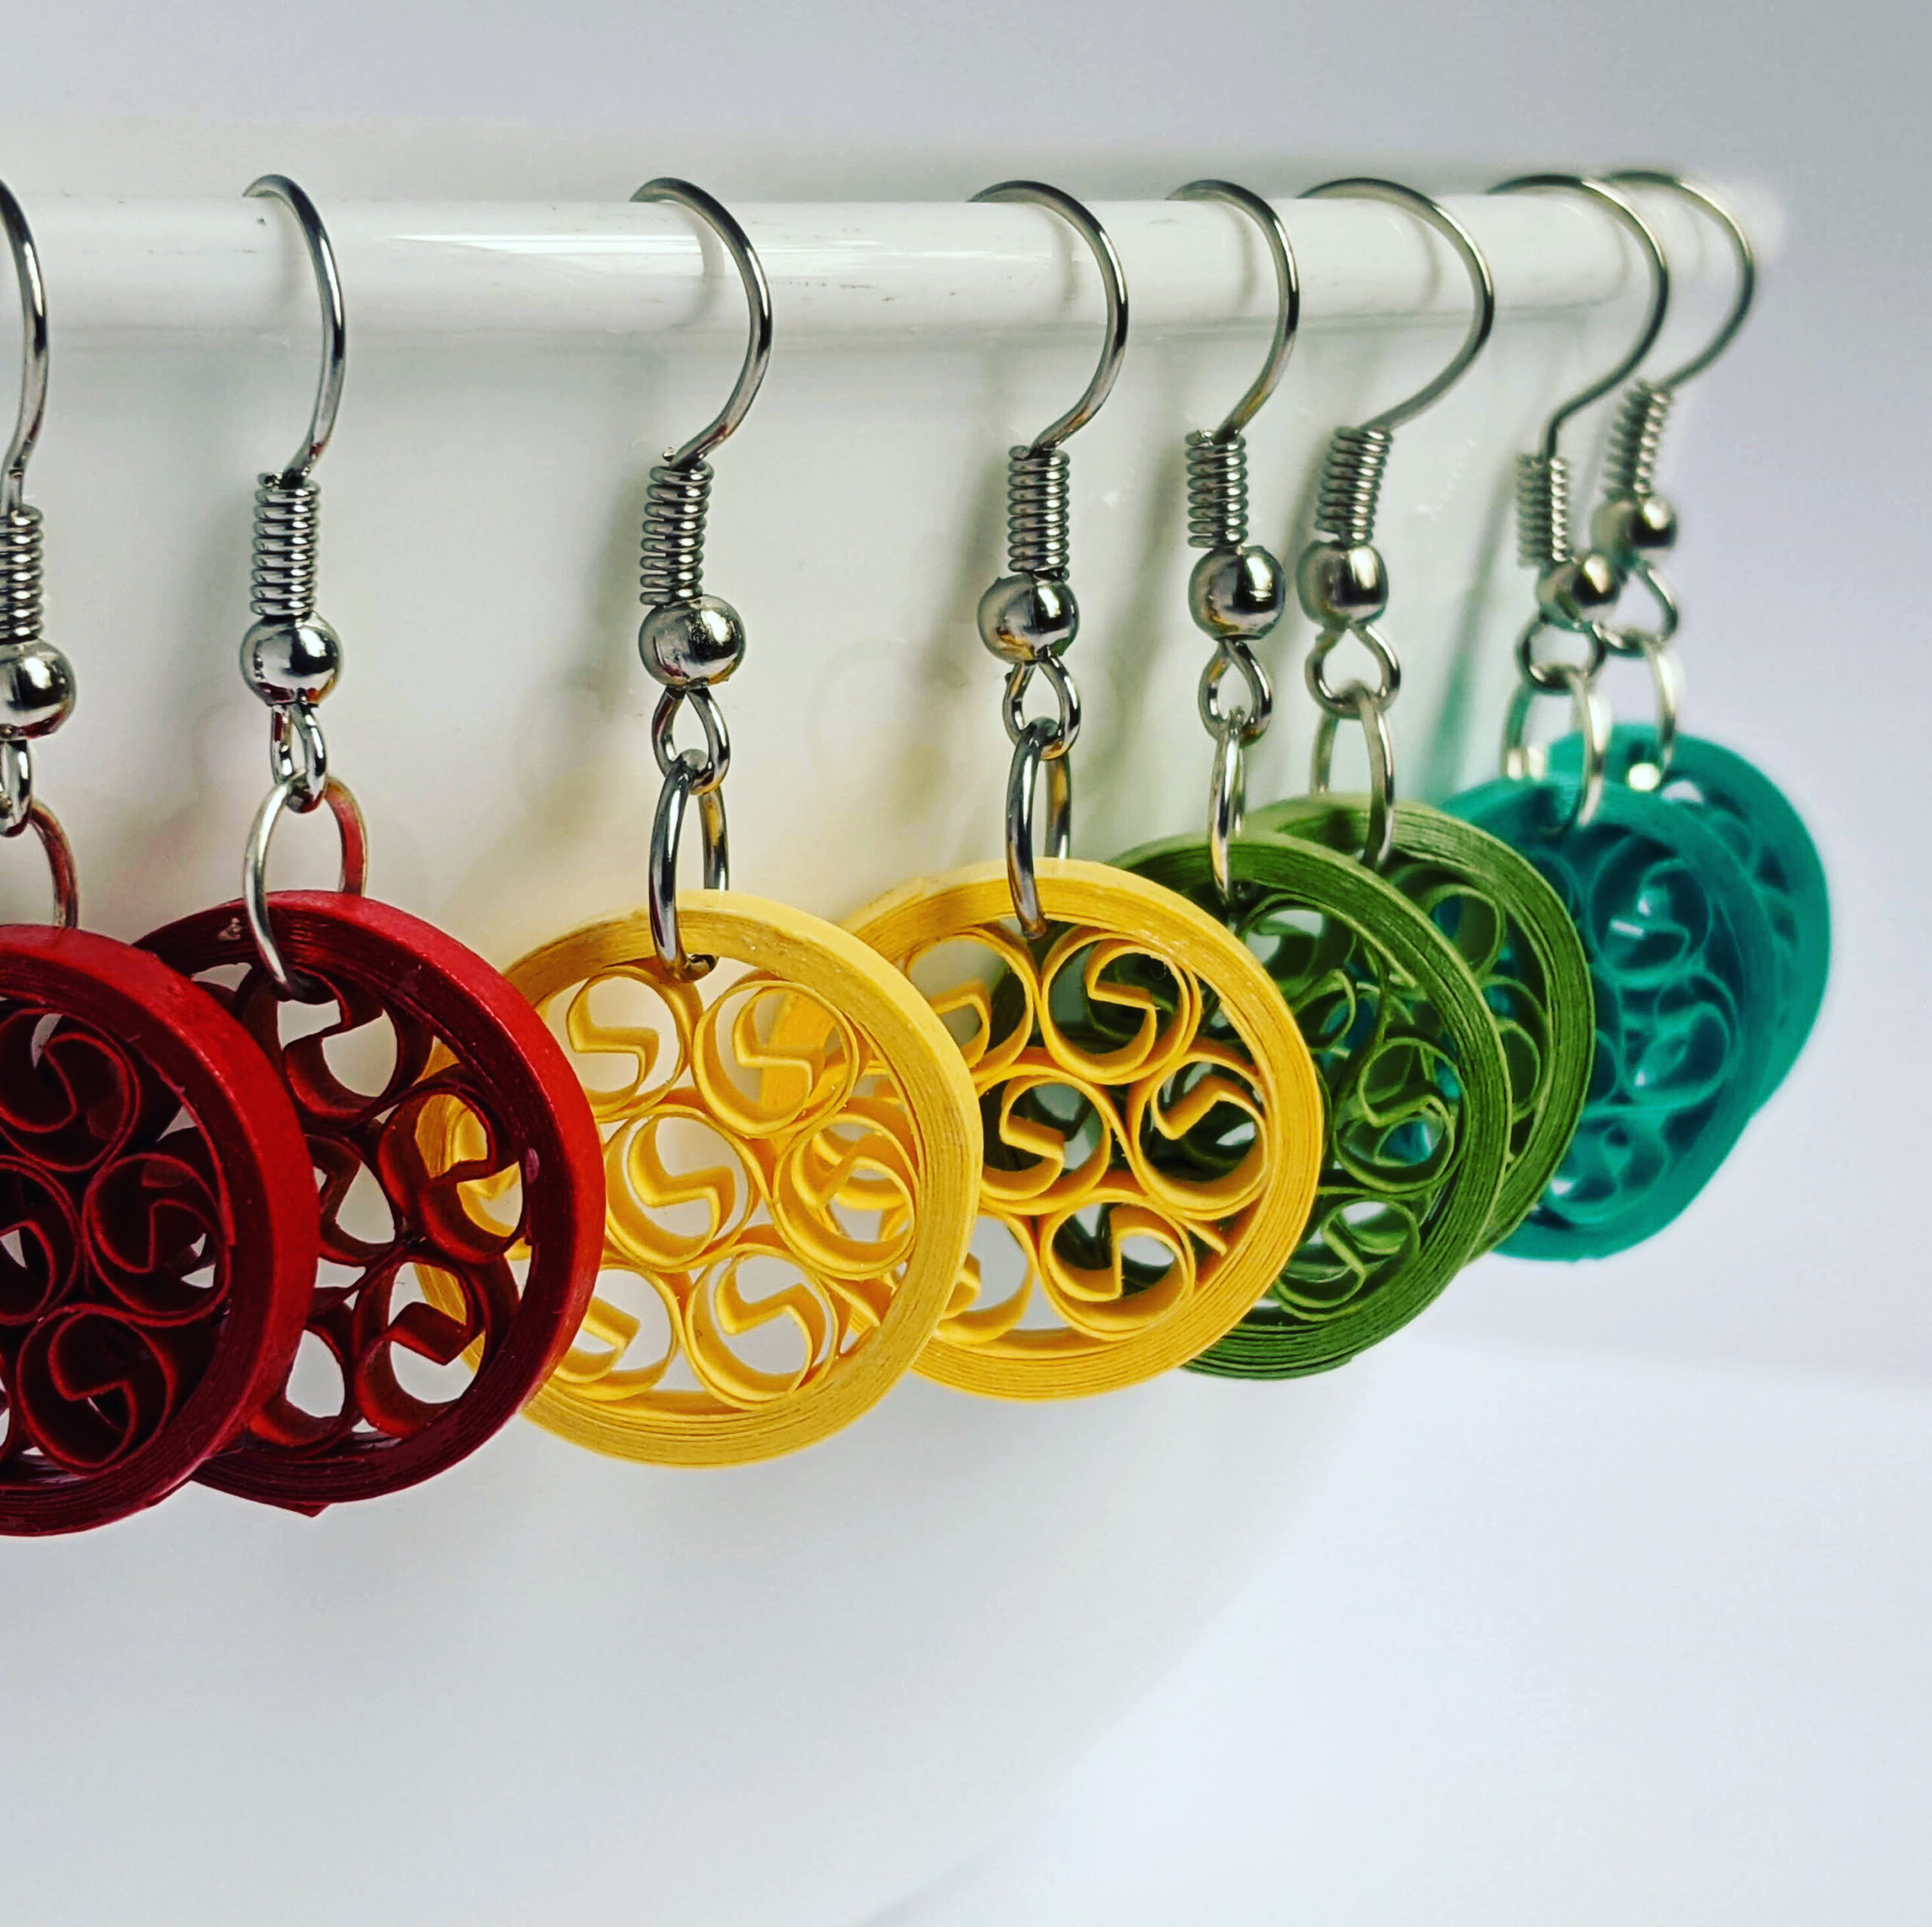 Red, yellow, green, blue quilled earrings made from rolled paper.